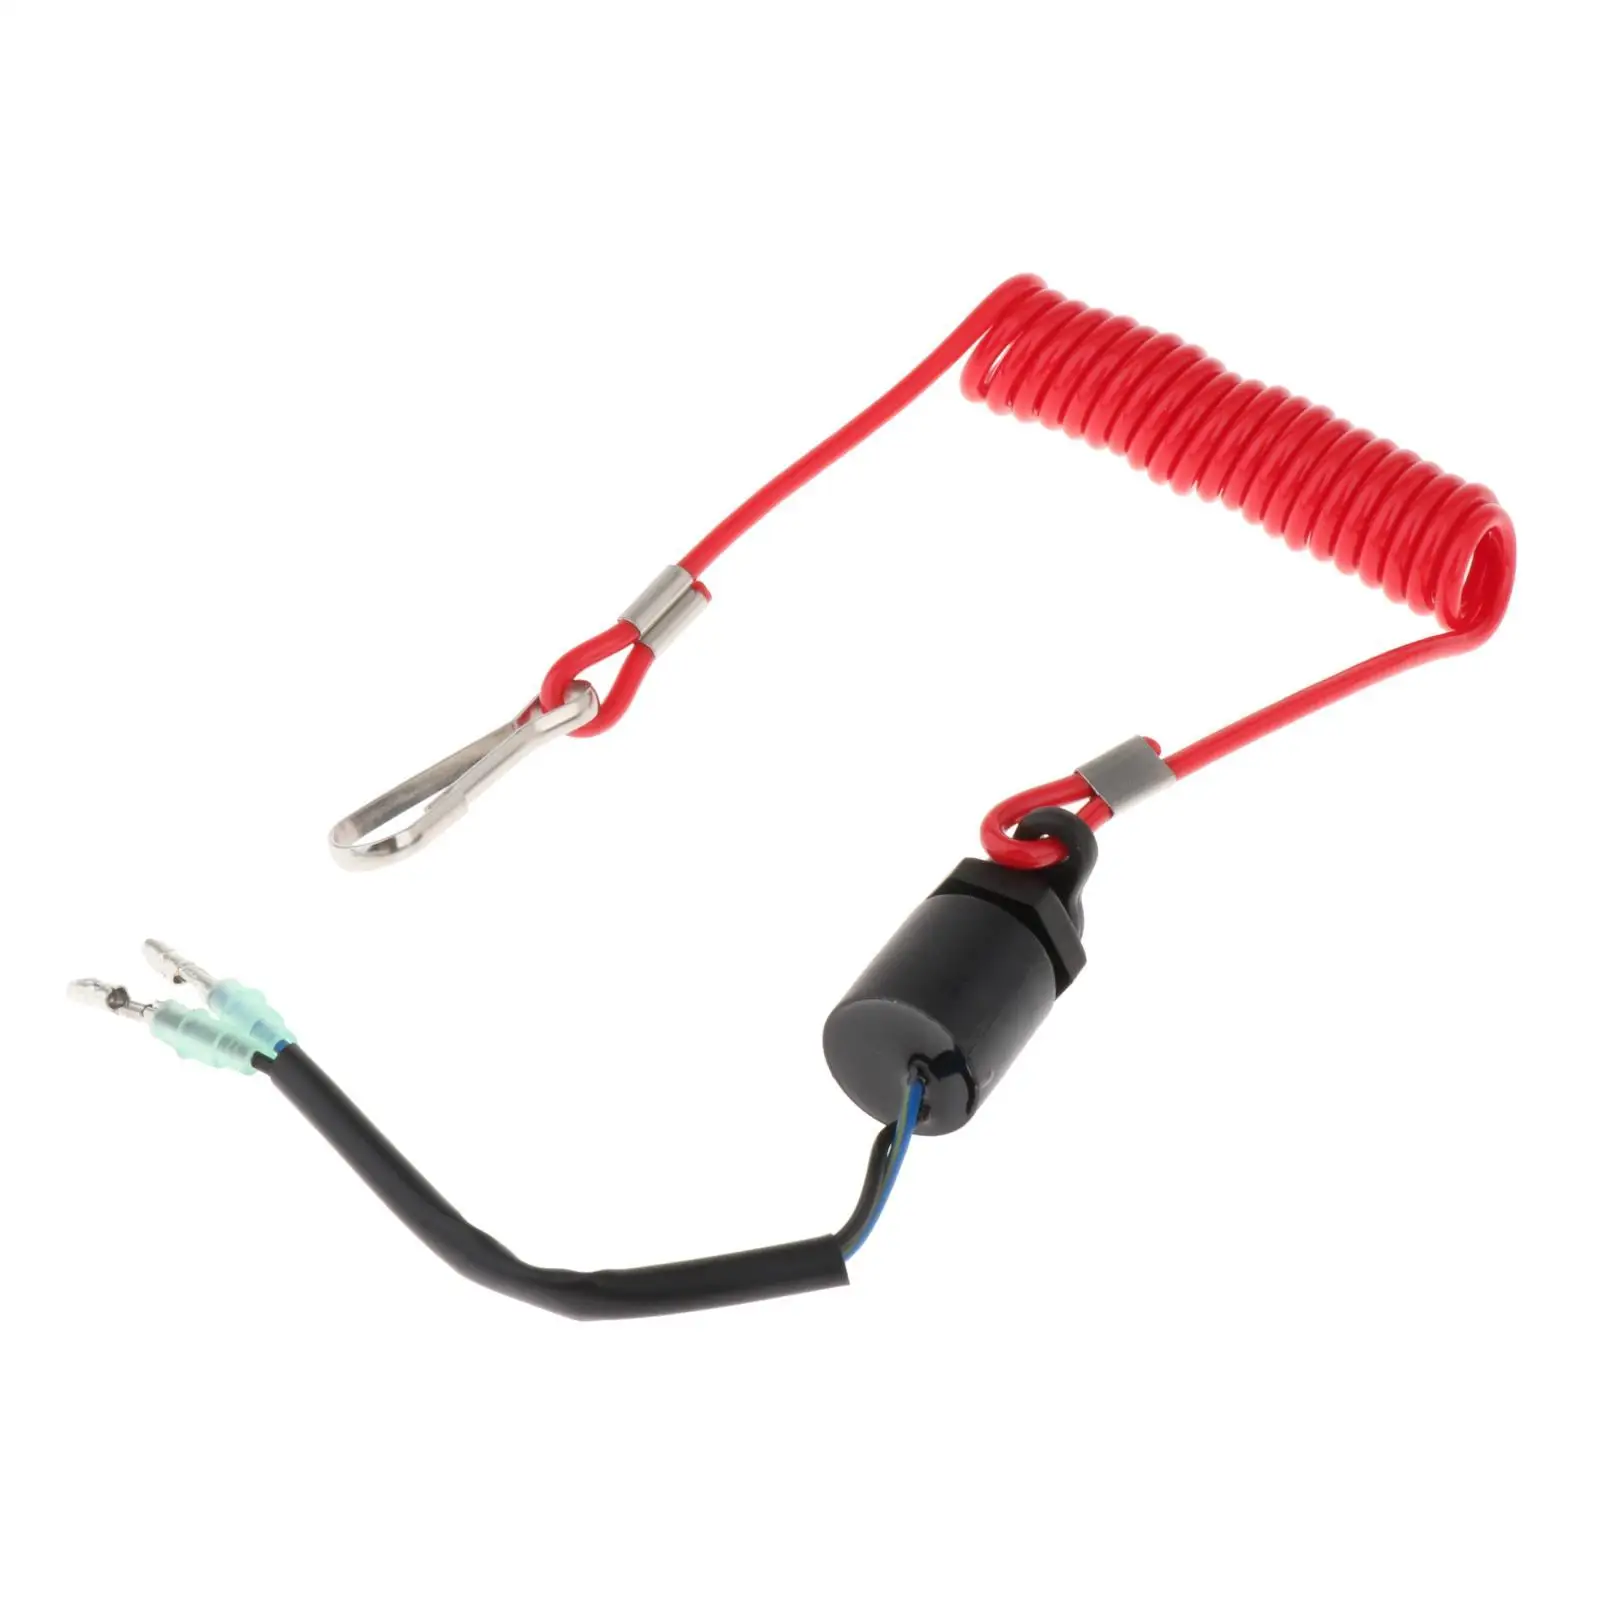 Boat Engine Stop Switch 37820-92E03 Emergency Cut Off Cord Boat Kill Switch with Lanyard for Suzuki DT DF Outboard Motors